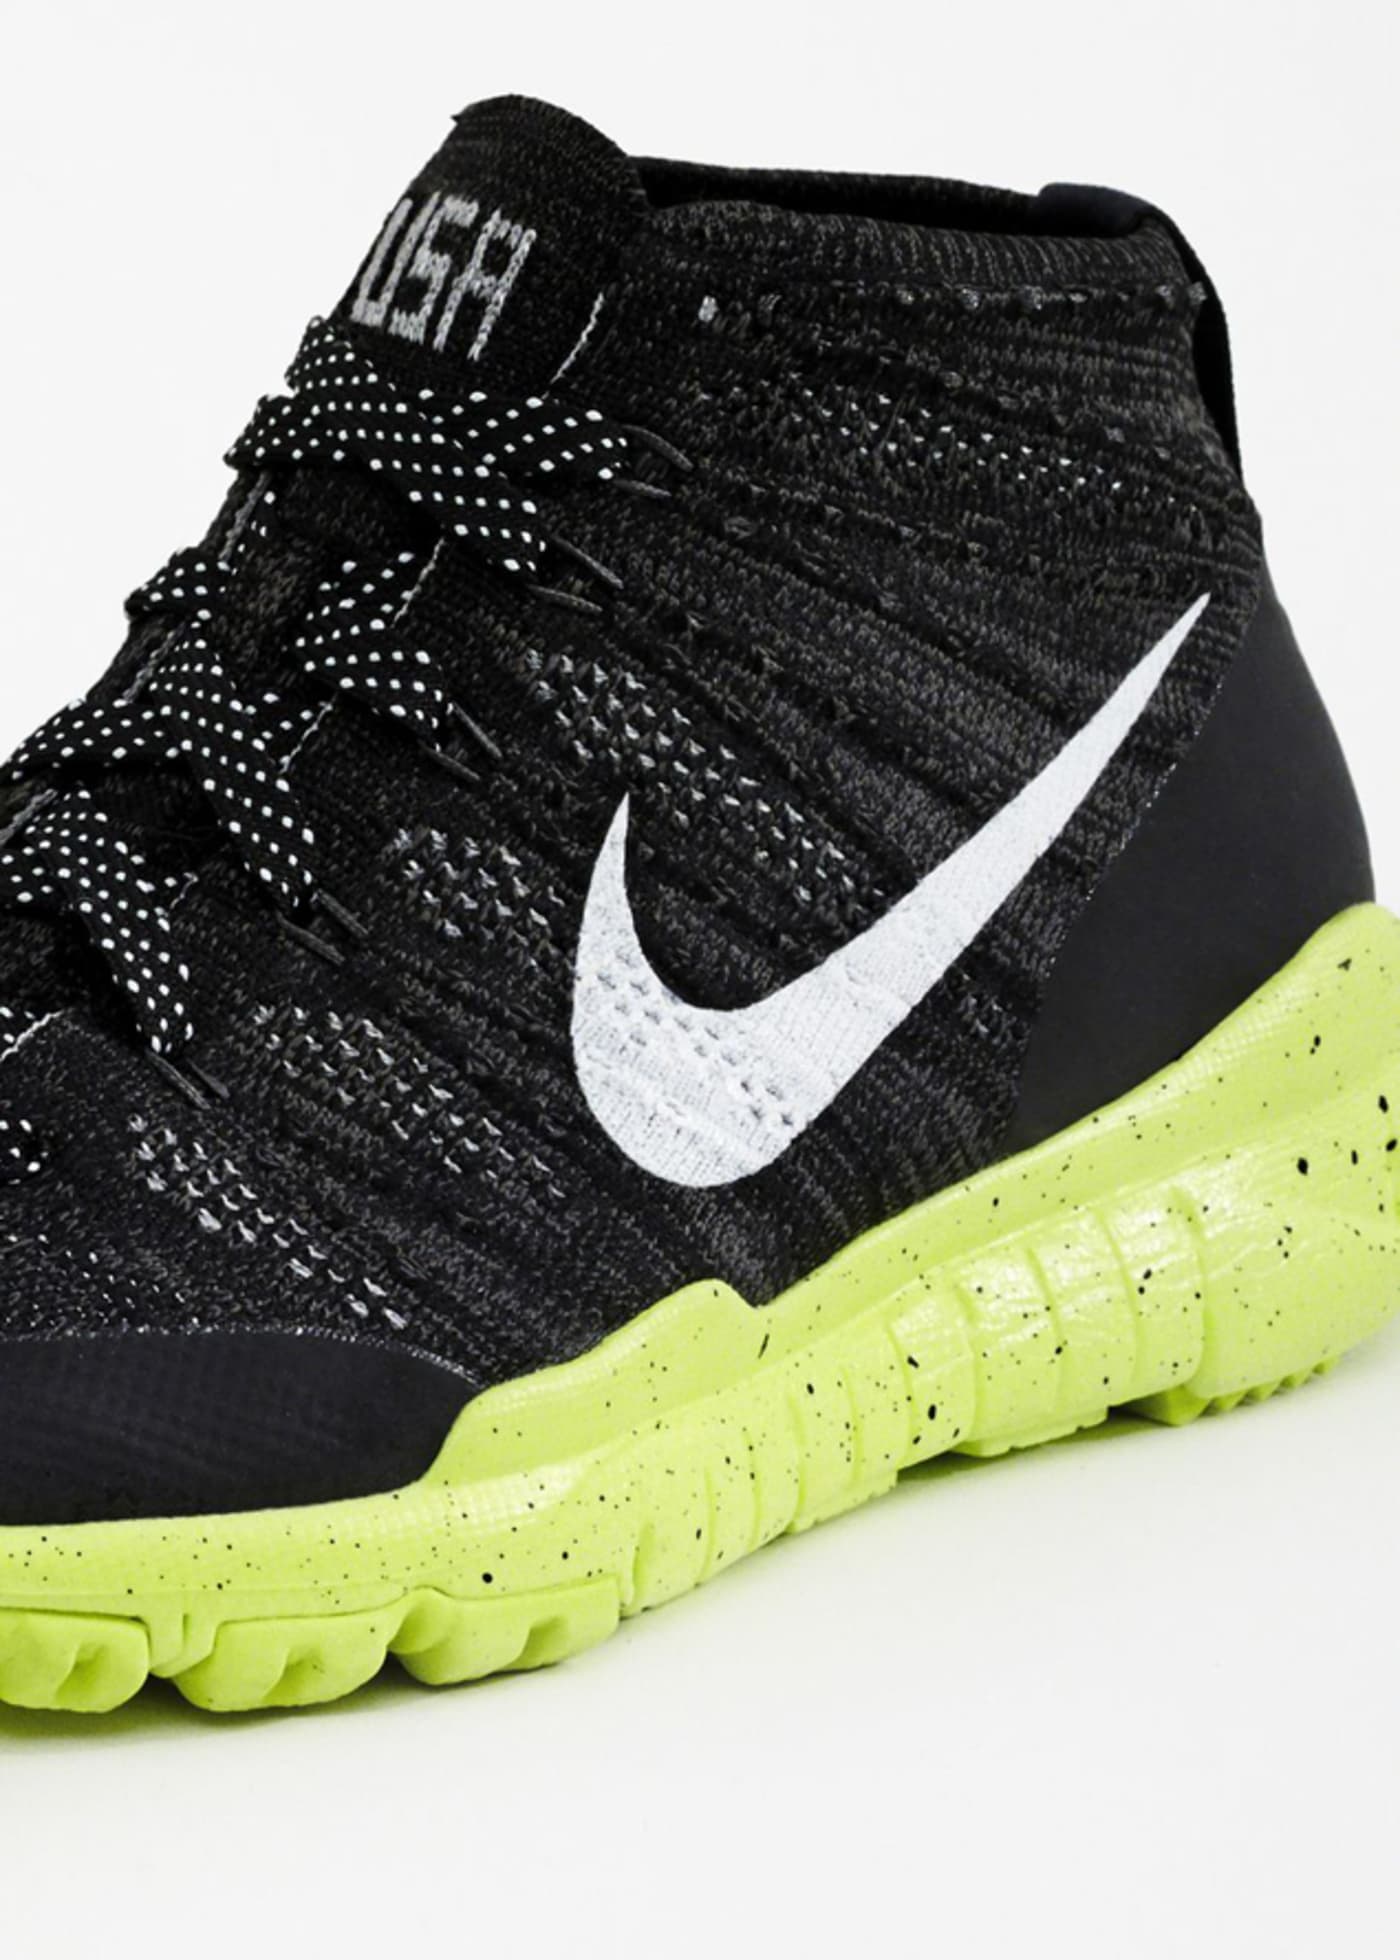 Find Out When the Nike Flyknit Trainer Chukka FSB Is Releasing Complex